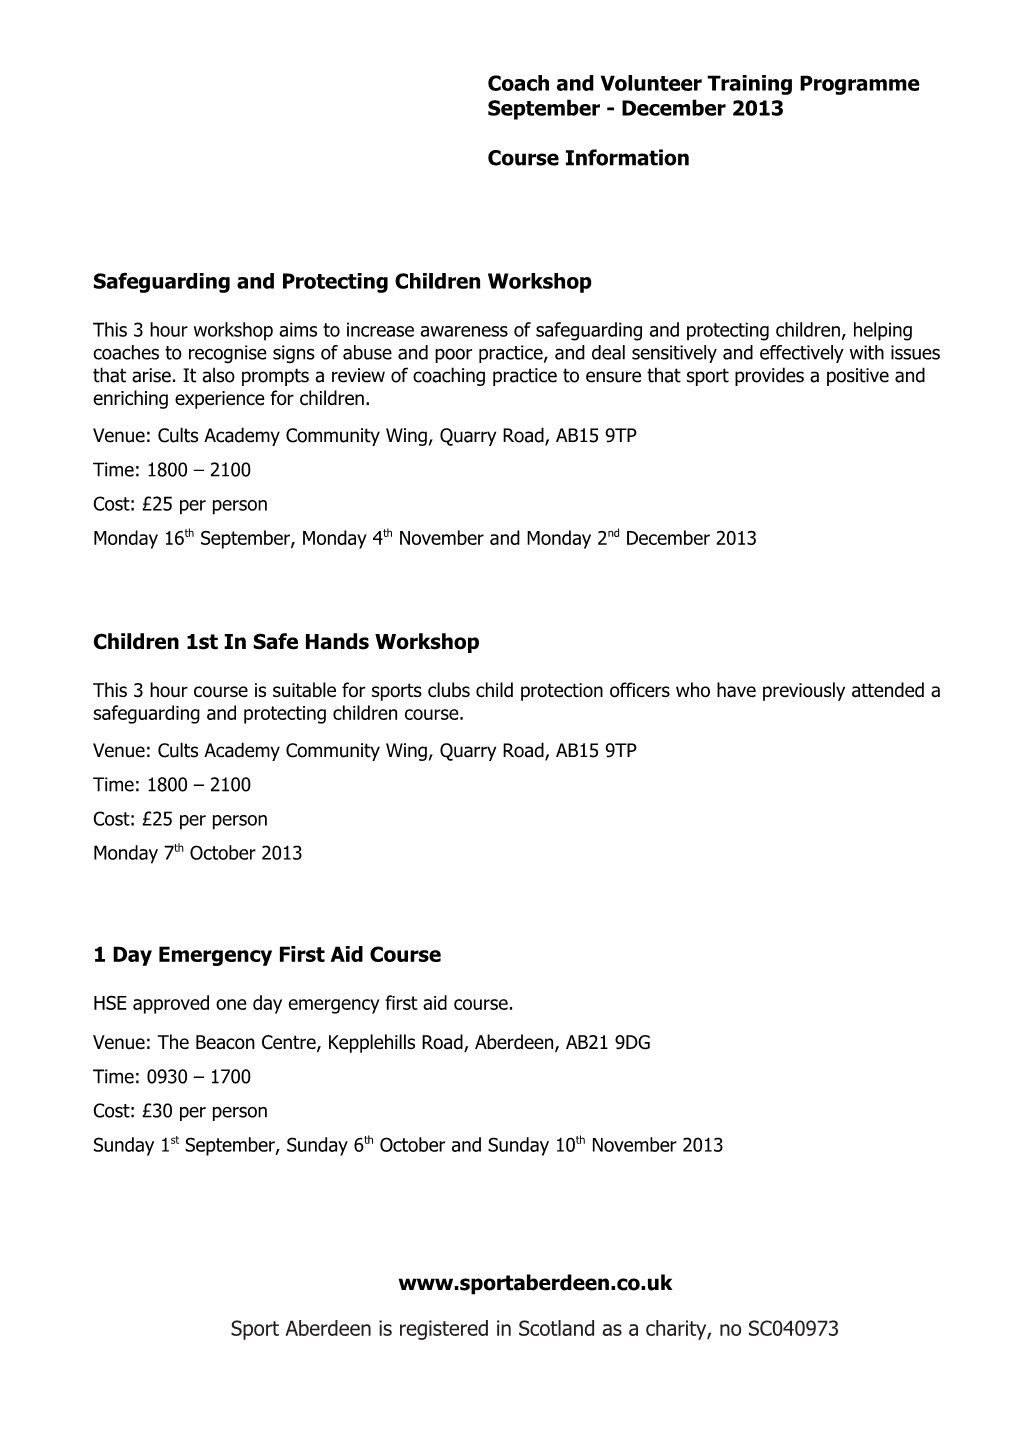 Workshops Dates for Coaches and Volunteers: - Child Protection, First Aid & Children 1St